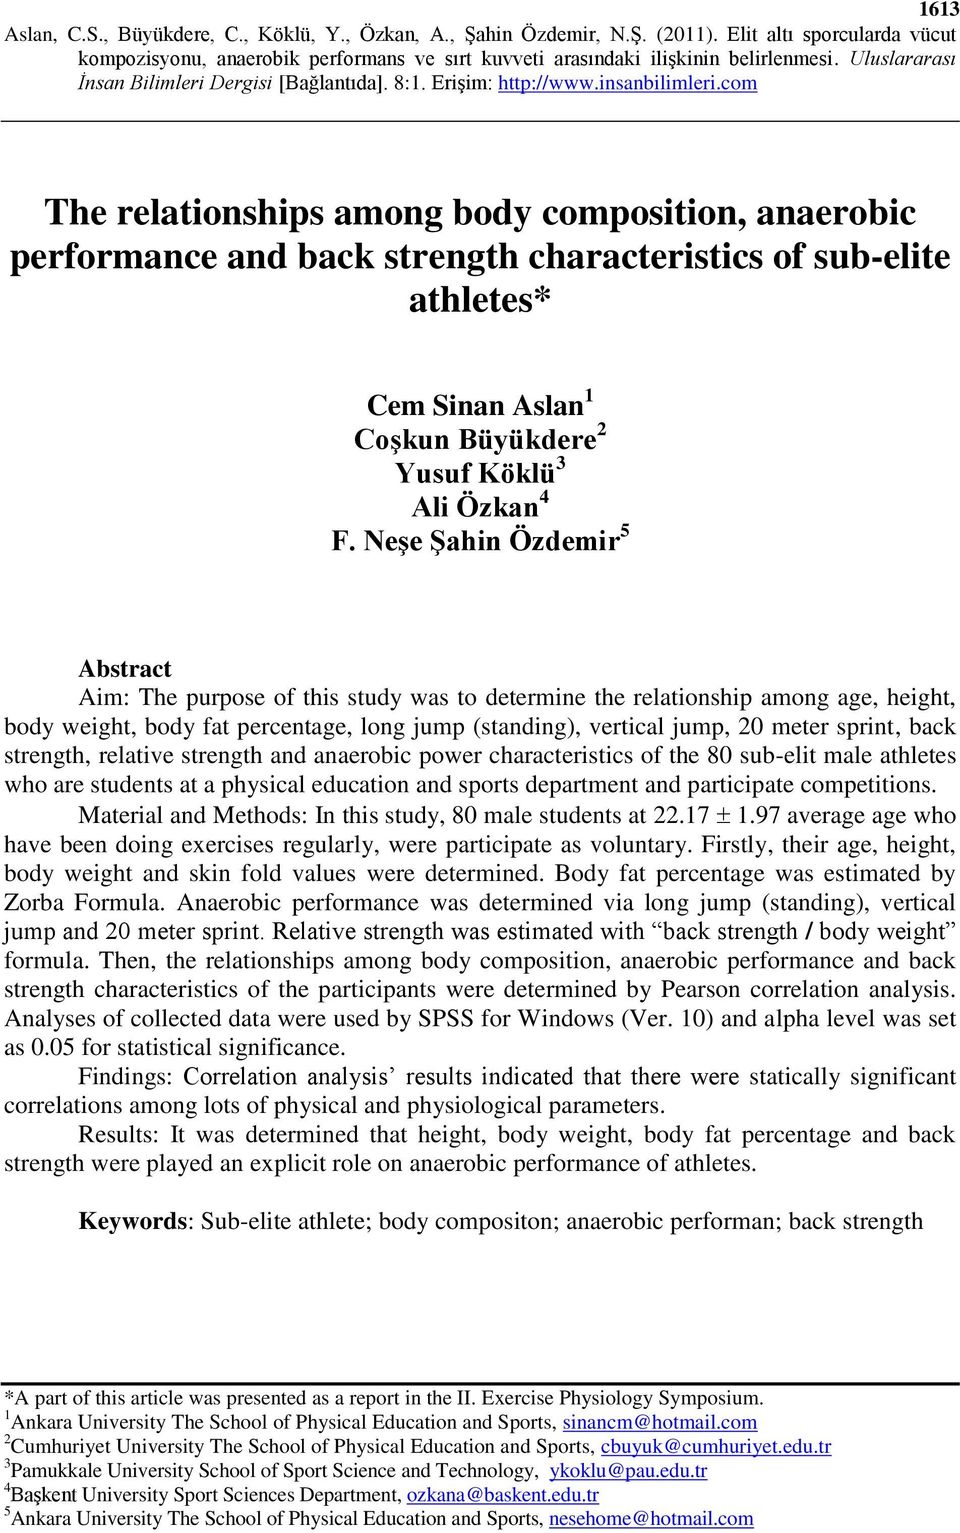 sprint, back strength, relative strength and anaerobic power characteristics of the 80 sub-elit male athletes who are students at a physical education and sports department and participate